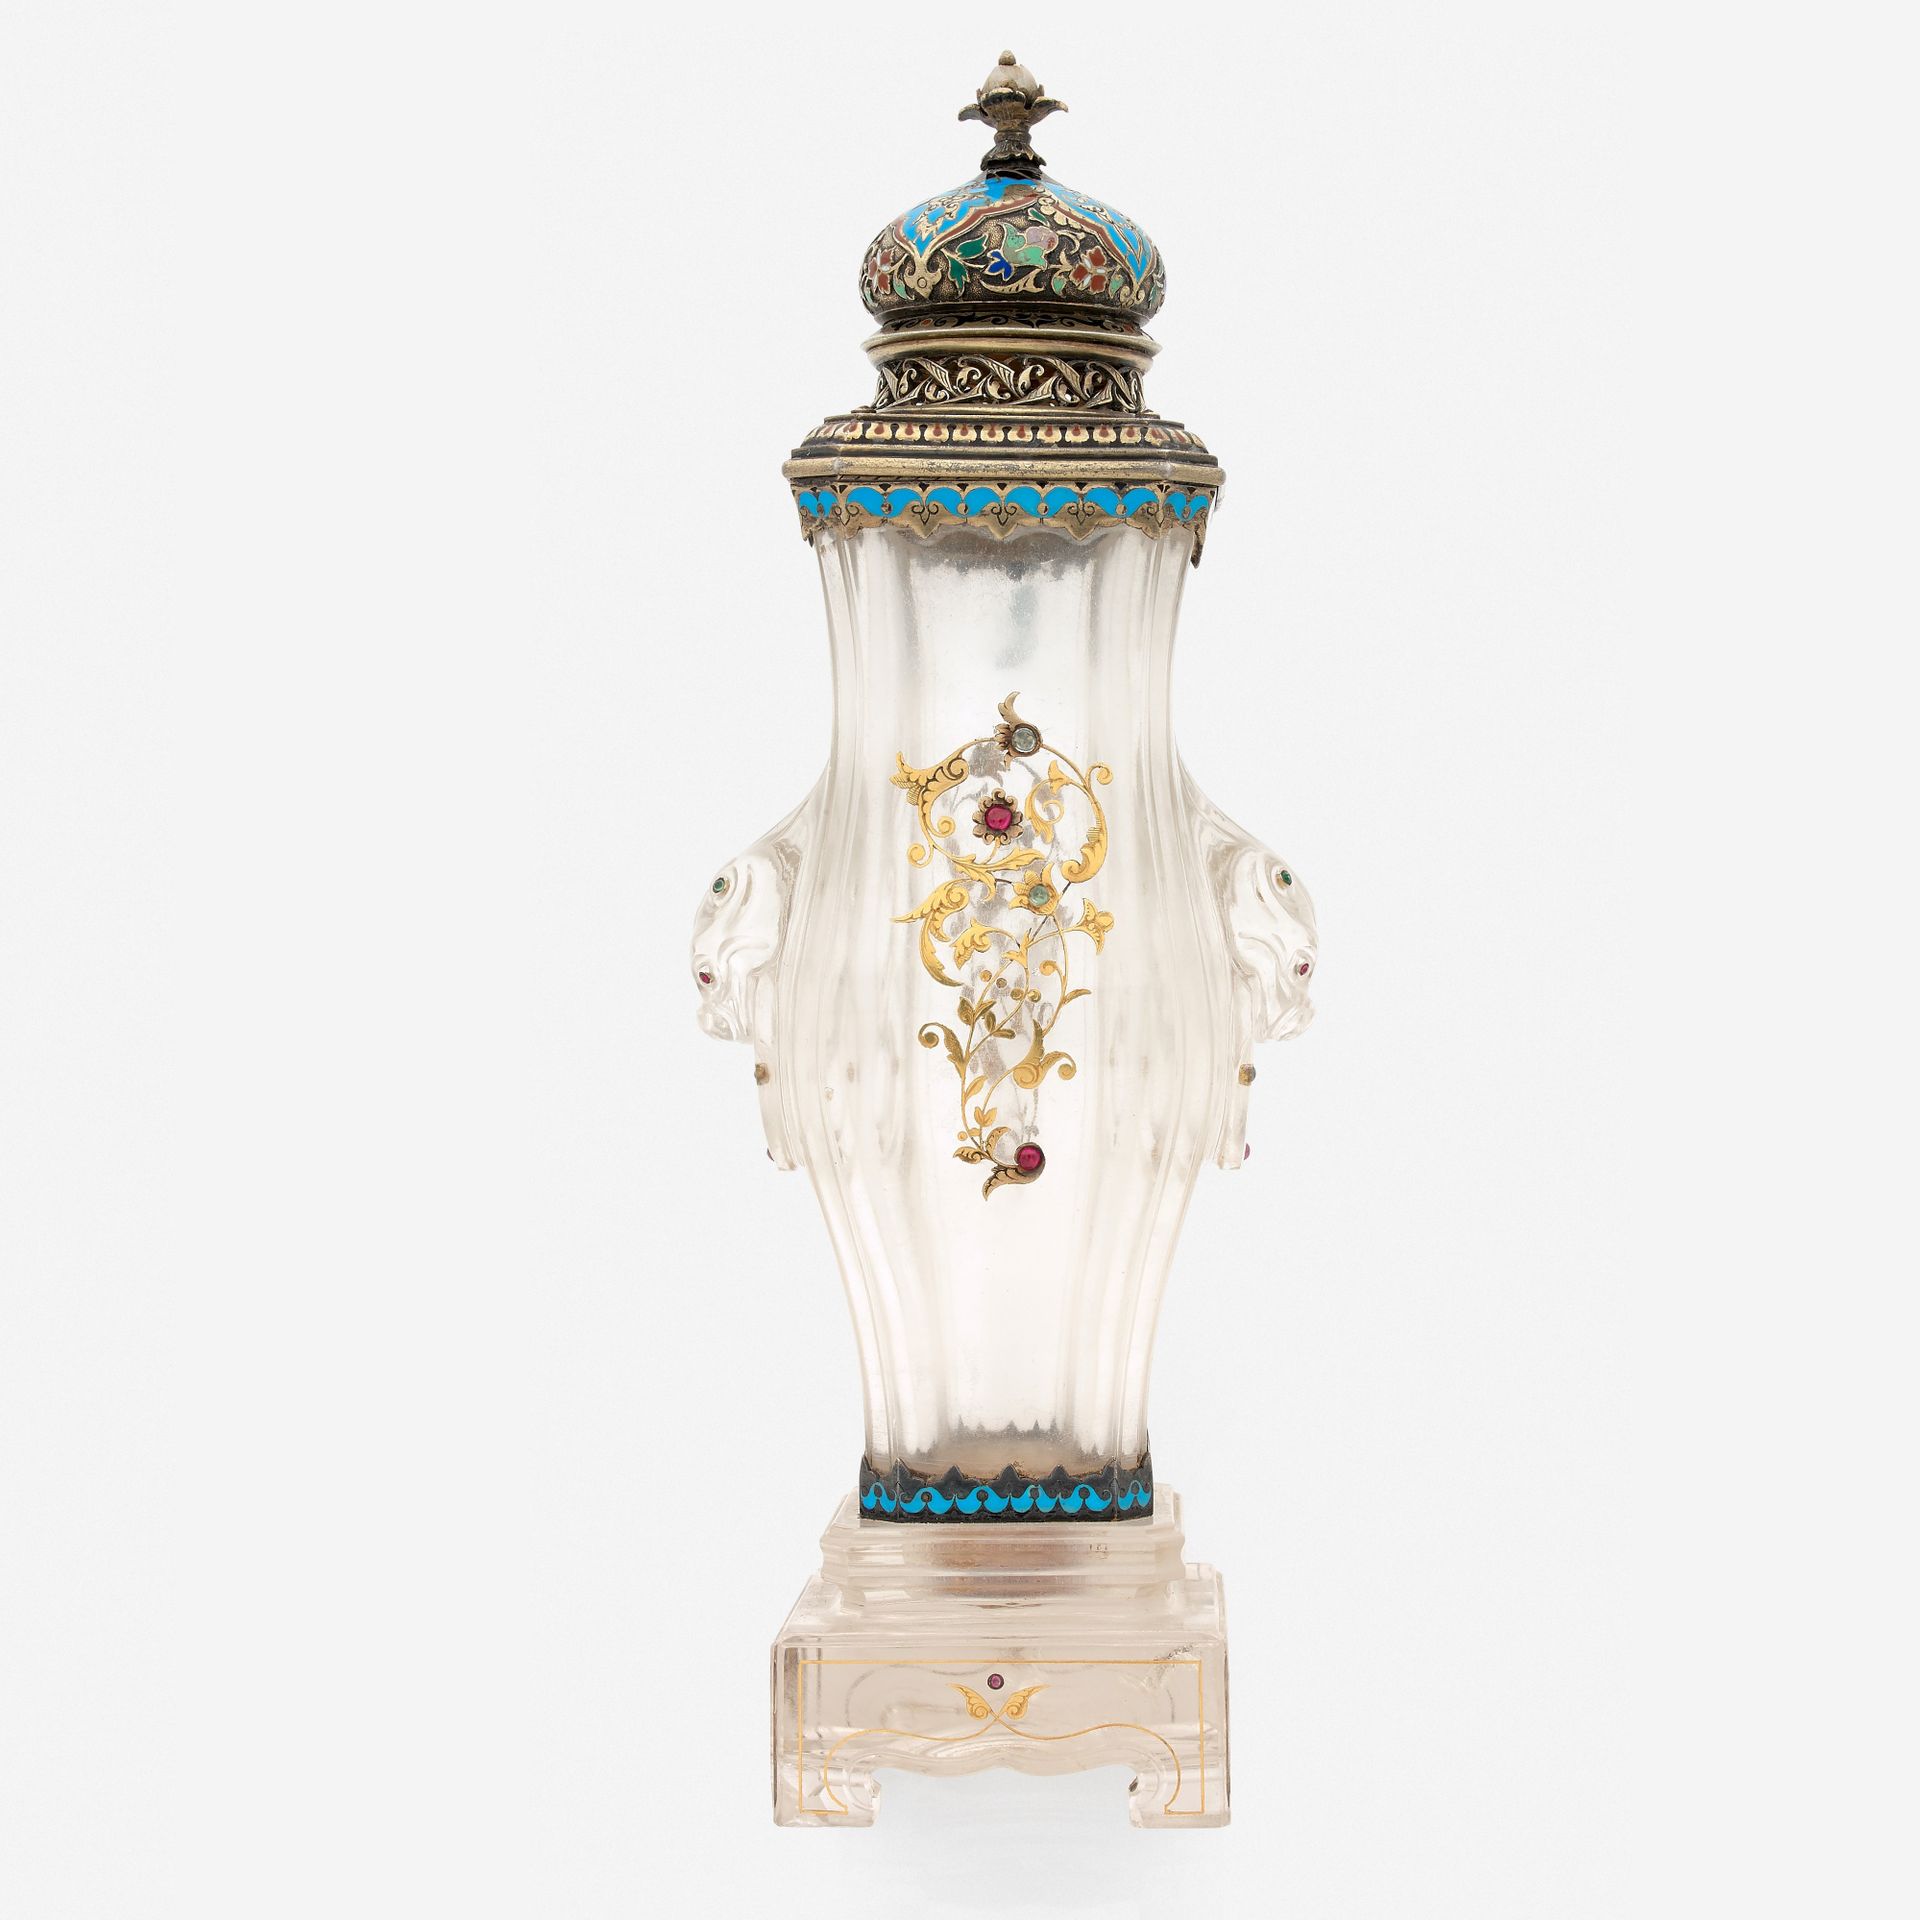 Null BOUCHERON (Attributed to)

PERFUME BOTTLE OF ORIENTAL INSPIRATION

LARGE BA&hellip;